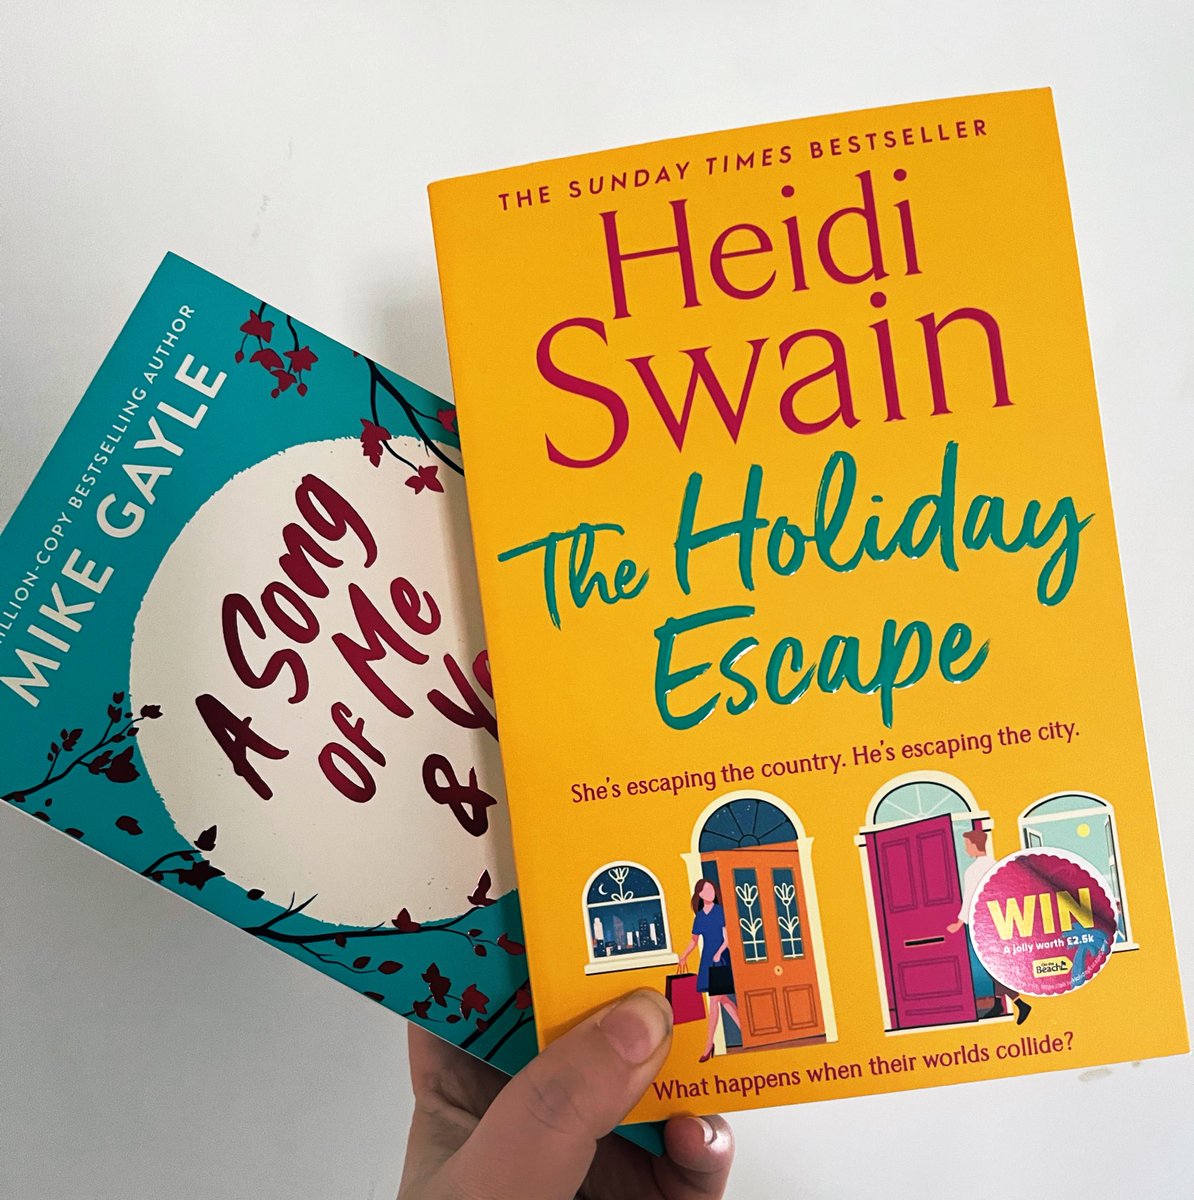 Just spotted #TheHolidayEscape by @Heidi_Swain in the wilds of @sainsburys book aisle along with many other fine authors too 😊…. Psst I may have got hold of it and couldn’t resist #ASongOfMeAndYou by @mikegayle 😉 too pretty to resist. @simonschuster @HodderBooks